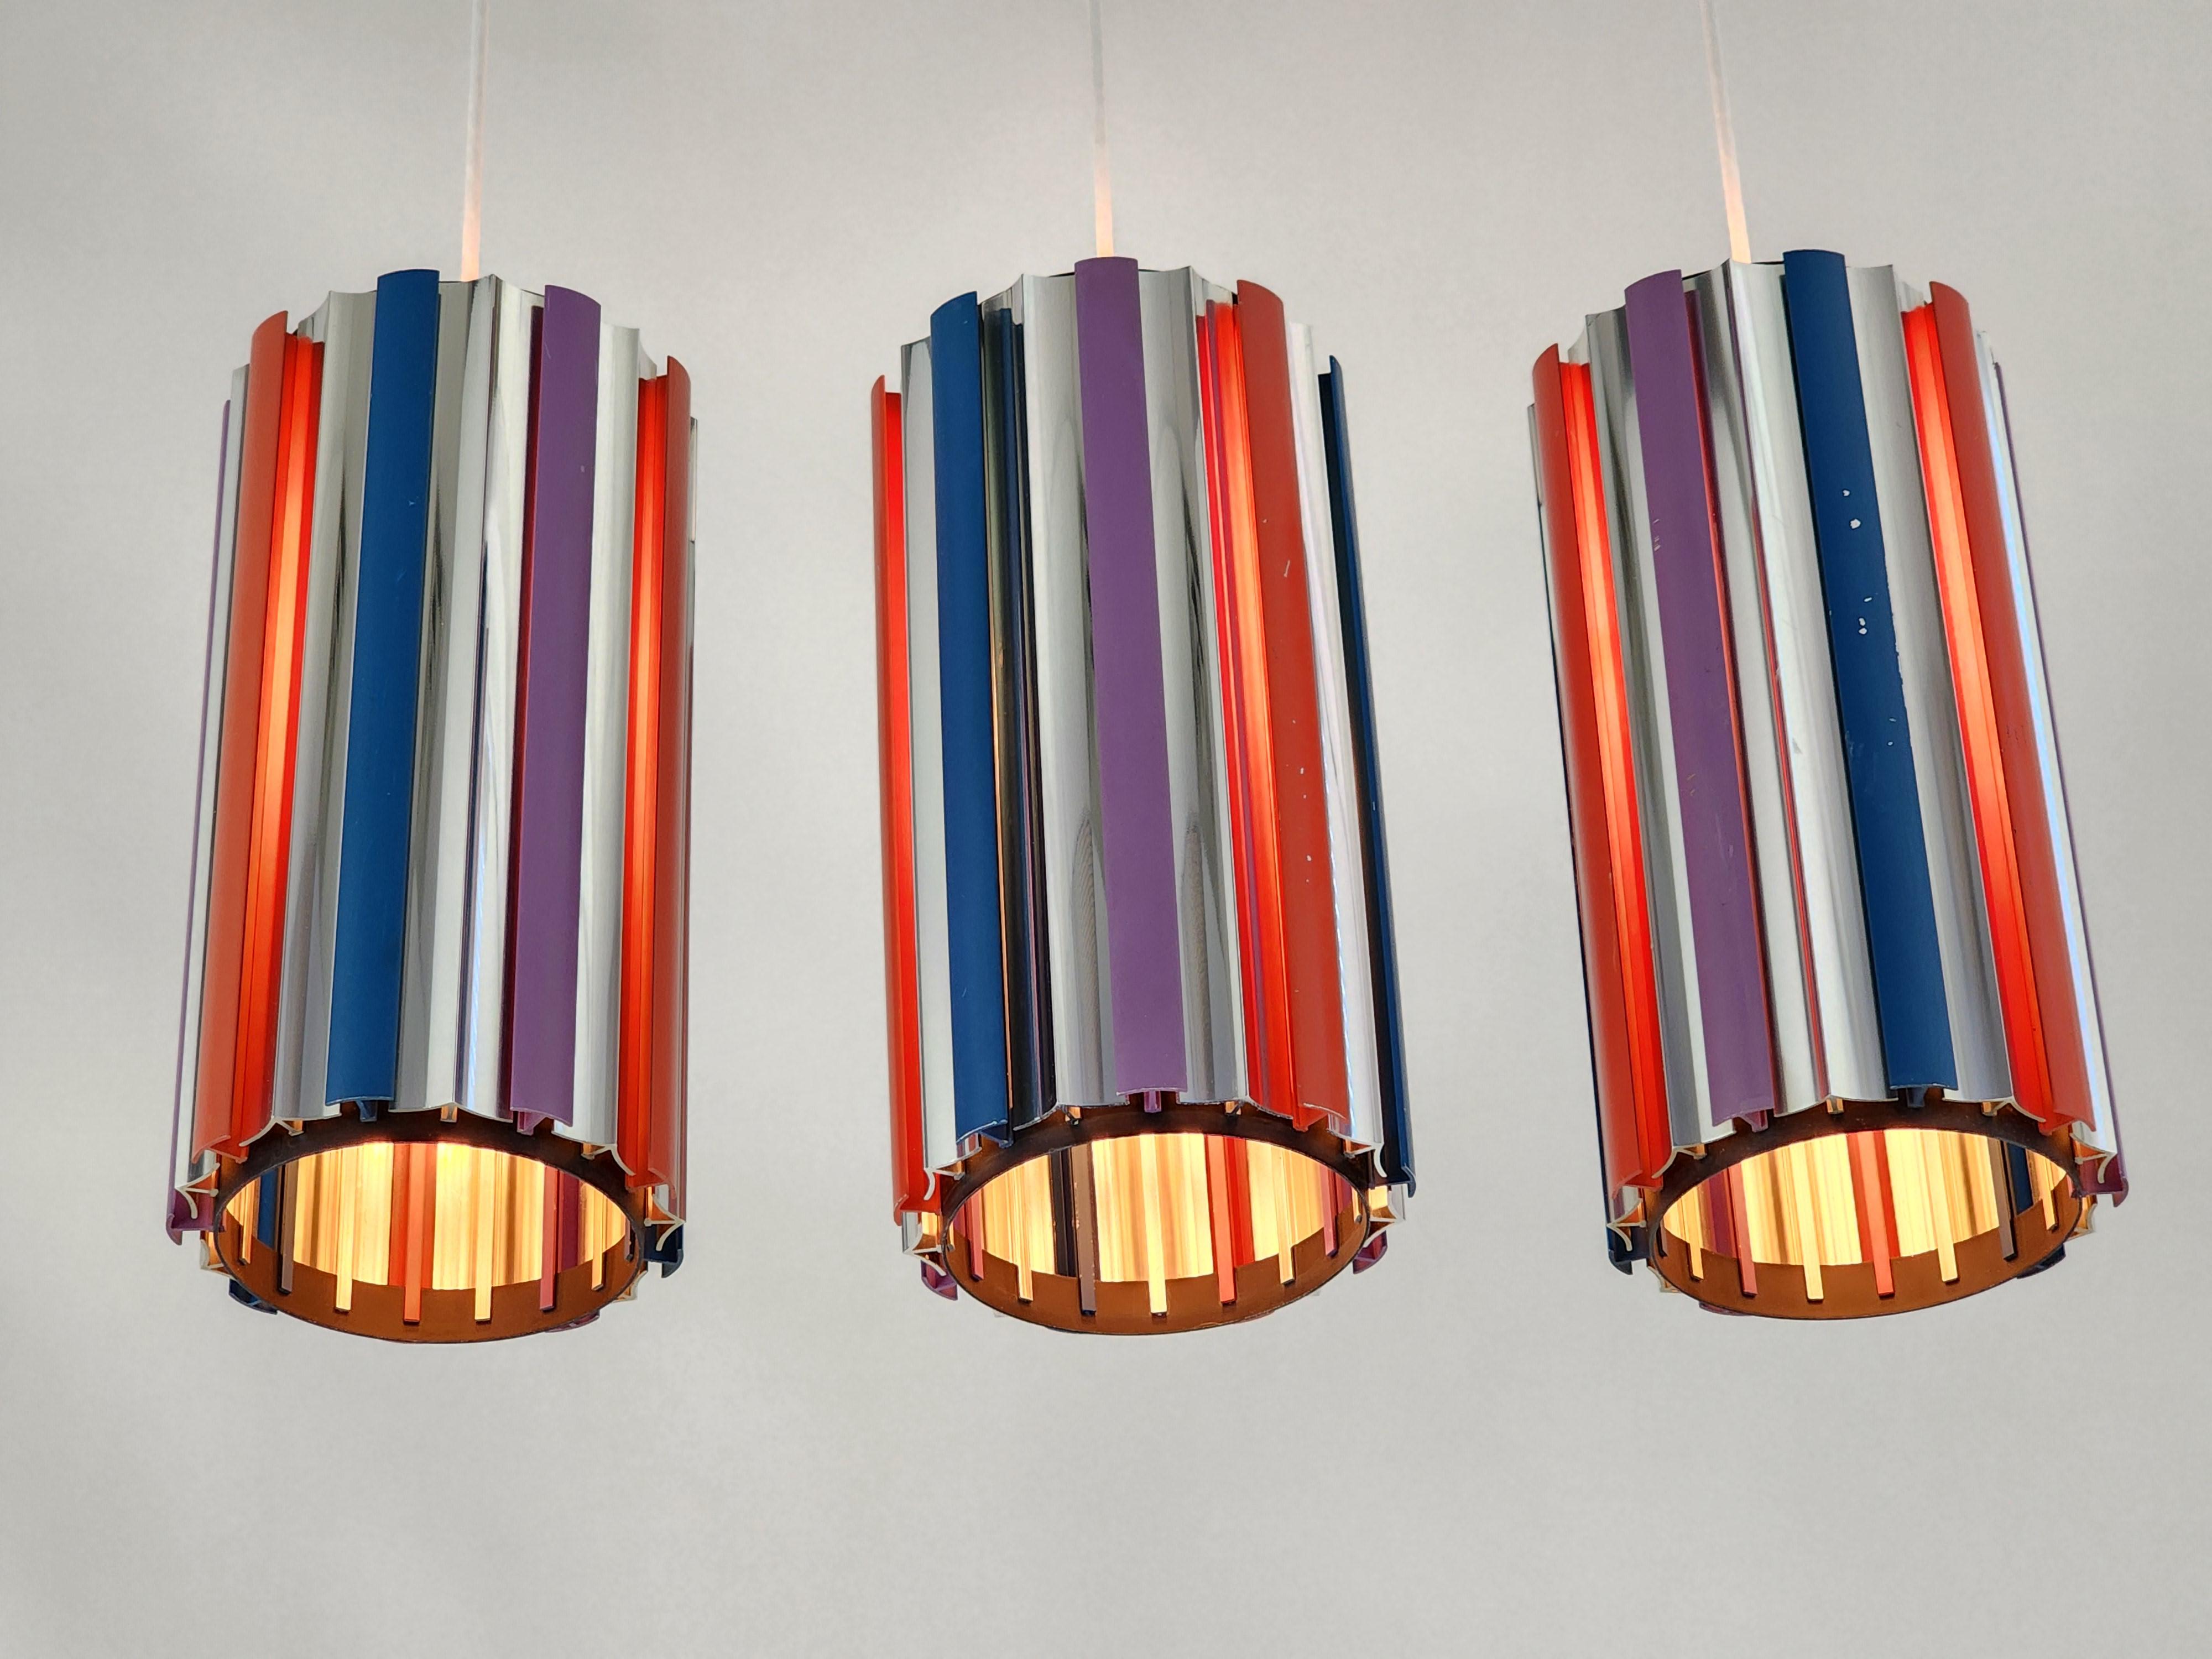 Colorfull extruded , anodized aluminium pendant by Lightolier.

Well made solid sturdy construction. 

Contain one E26 size ceramic socket rated at 60 watt. 

Come with five feet of cord and canopy. 

